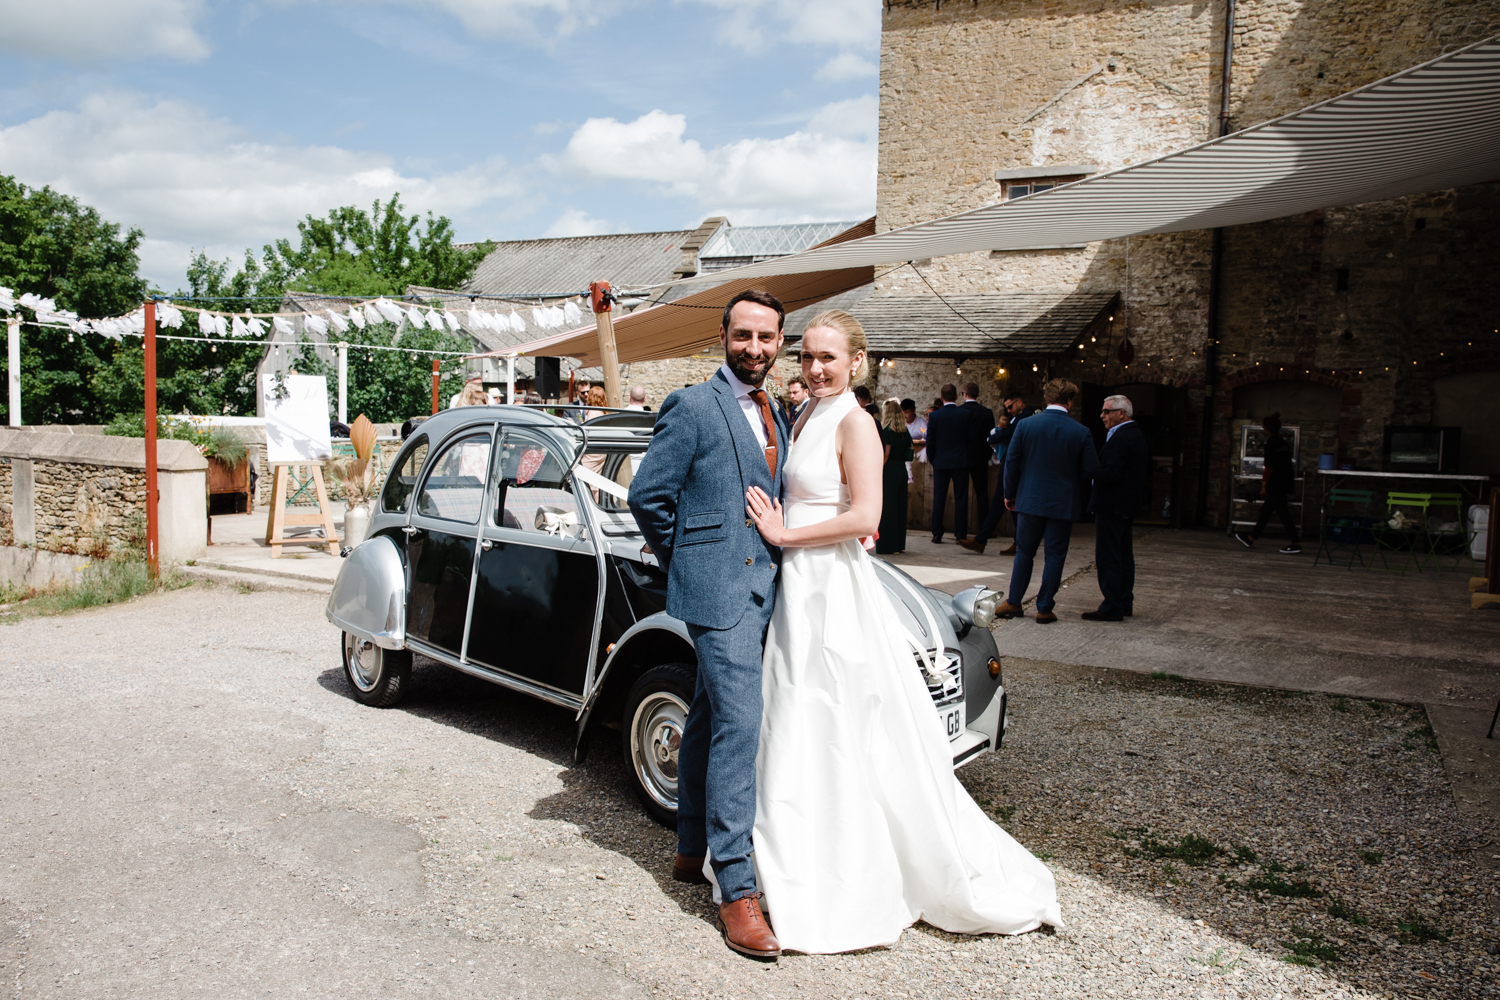 A newly married couple poses for a photograph next to  a vintage Citreön 2cv